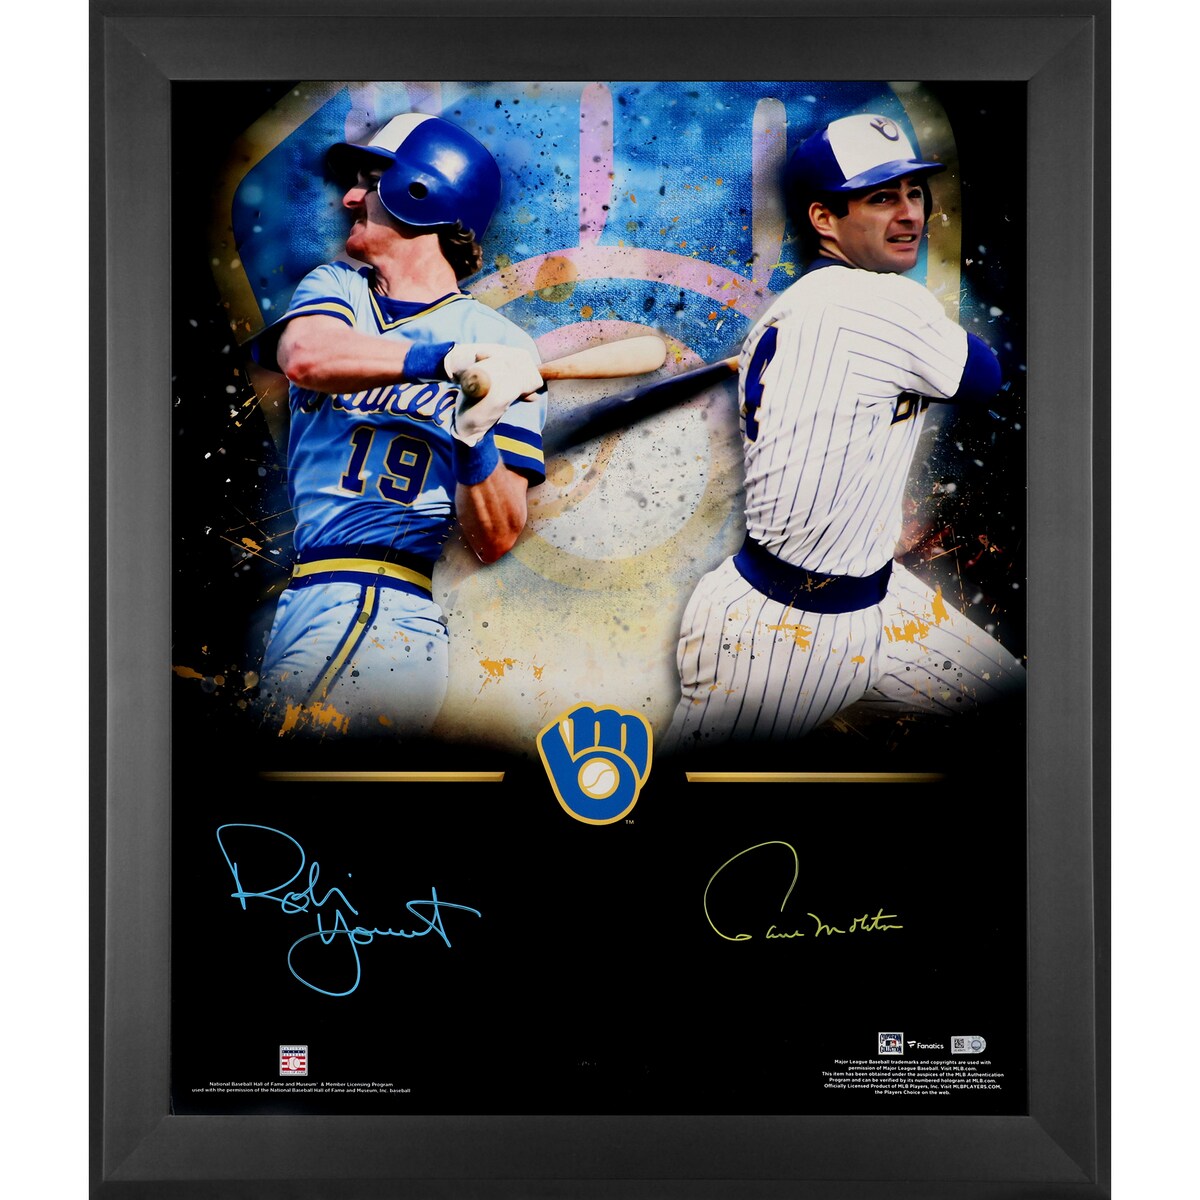 Take your collection of Milwaukee Brewers memorabilia to the next level with this autographed Paul Molitor and Robin Yount 20'' x 24'' In Focus Framed Photograph. Whether displayed in your home or office, it's the perfect way to highlight your passion for the Milwaukee Brewers for years to come.Obtained under the auspices of the Major League Baseball Authentication Program and can be verified by its numbered hologram at MLB.comHand-signed autograph by Paul Molitor and Robin YountPhotograph measures approx. 20'' x 24''Brand: Fanatics AuthenticOfficially licensedSignatures may varyIncludes an individually numbered, tamper-evident hologram